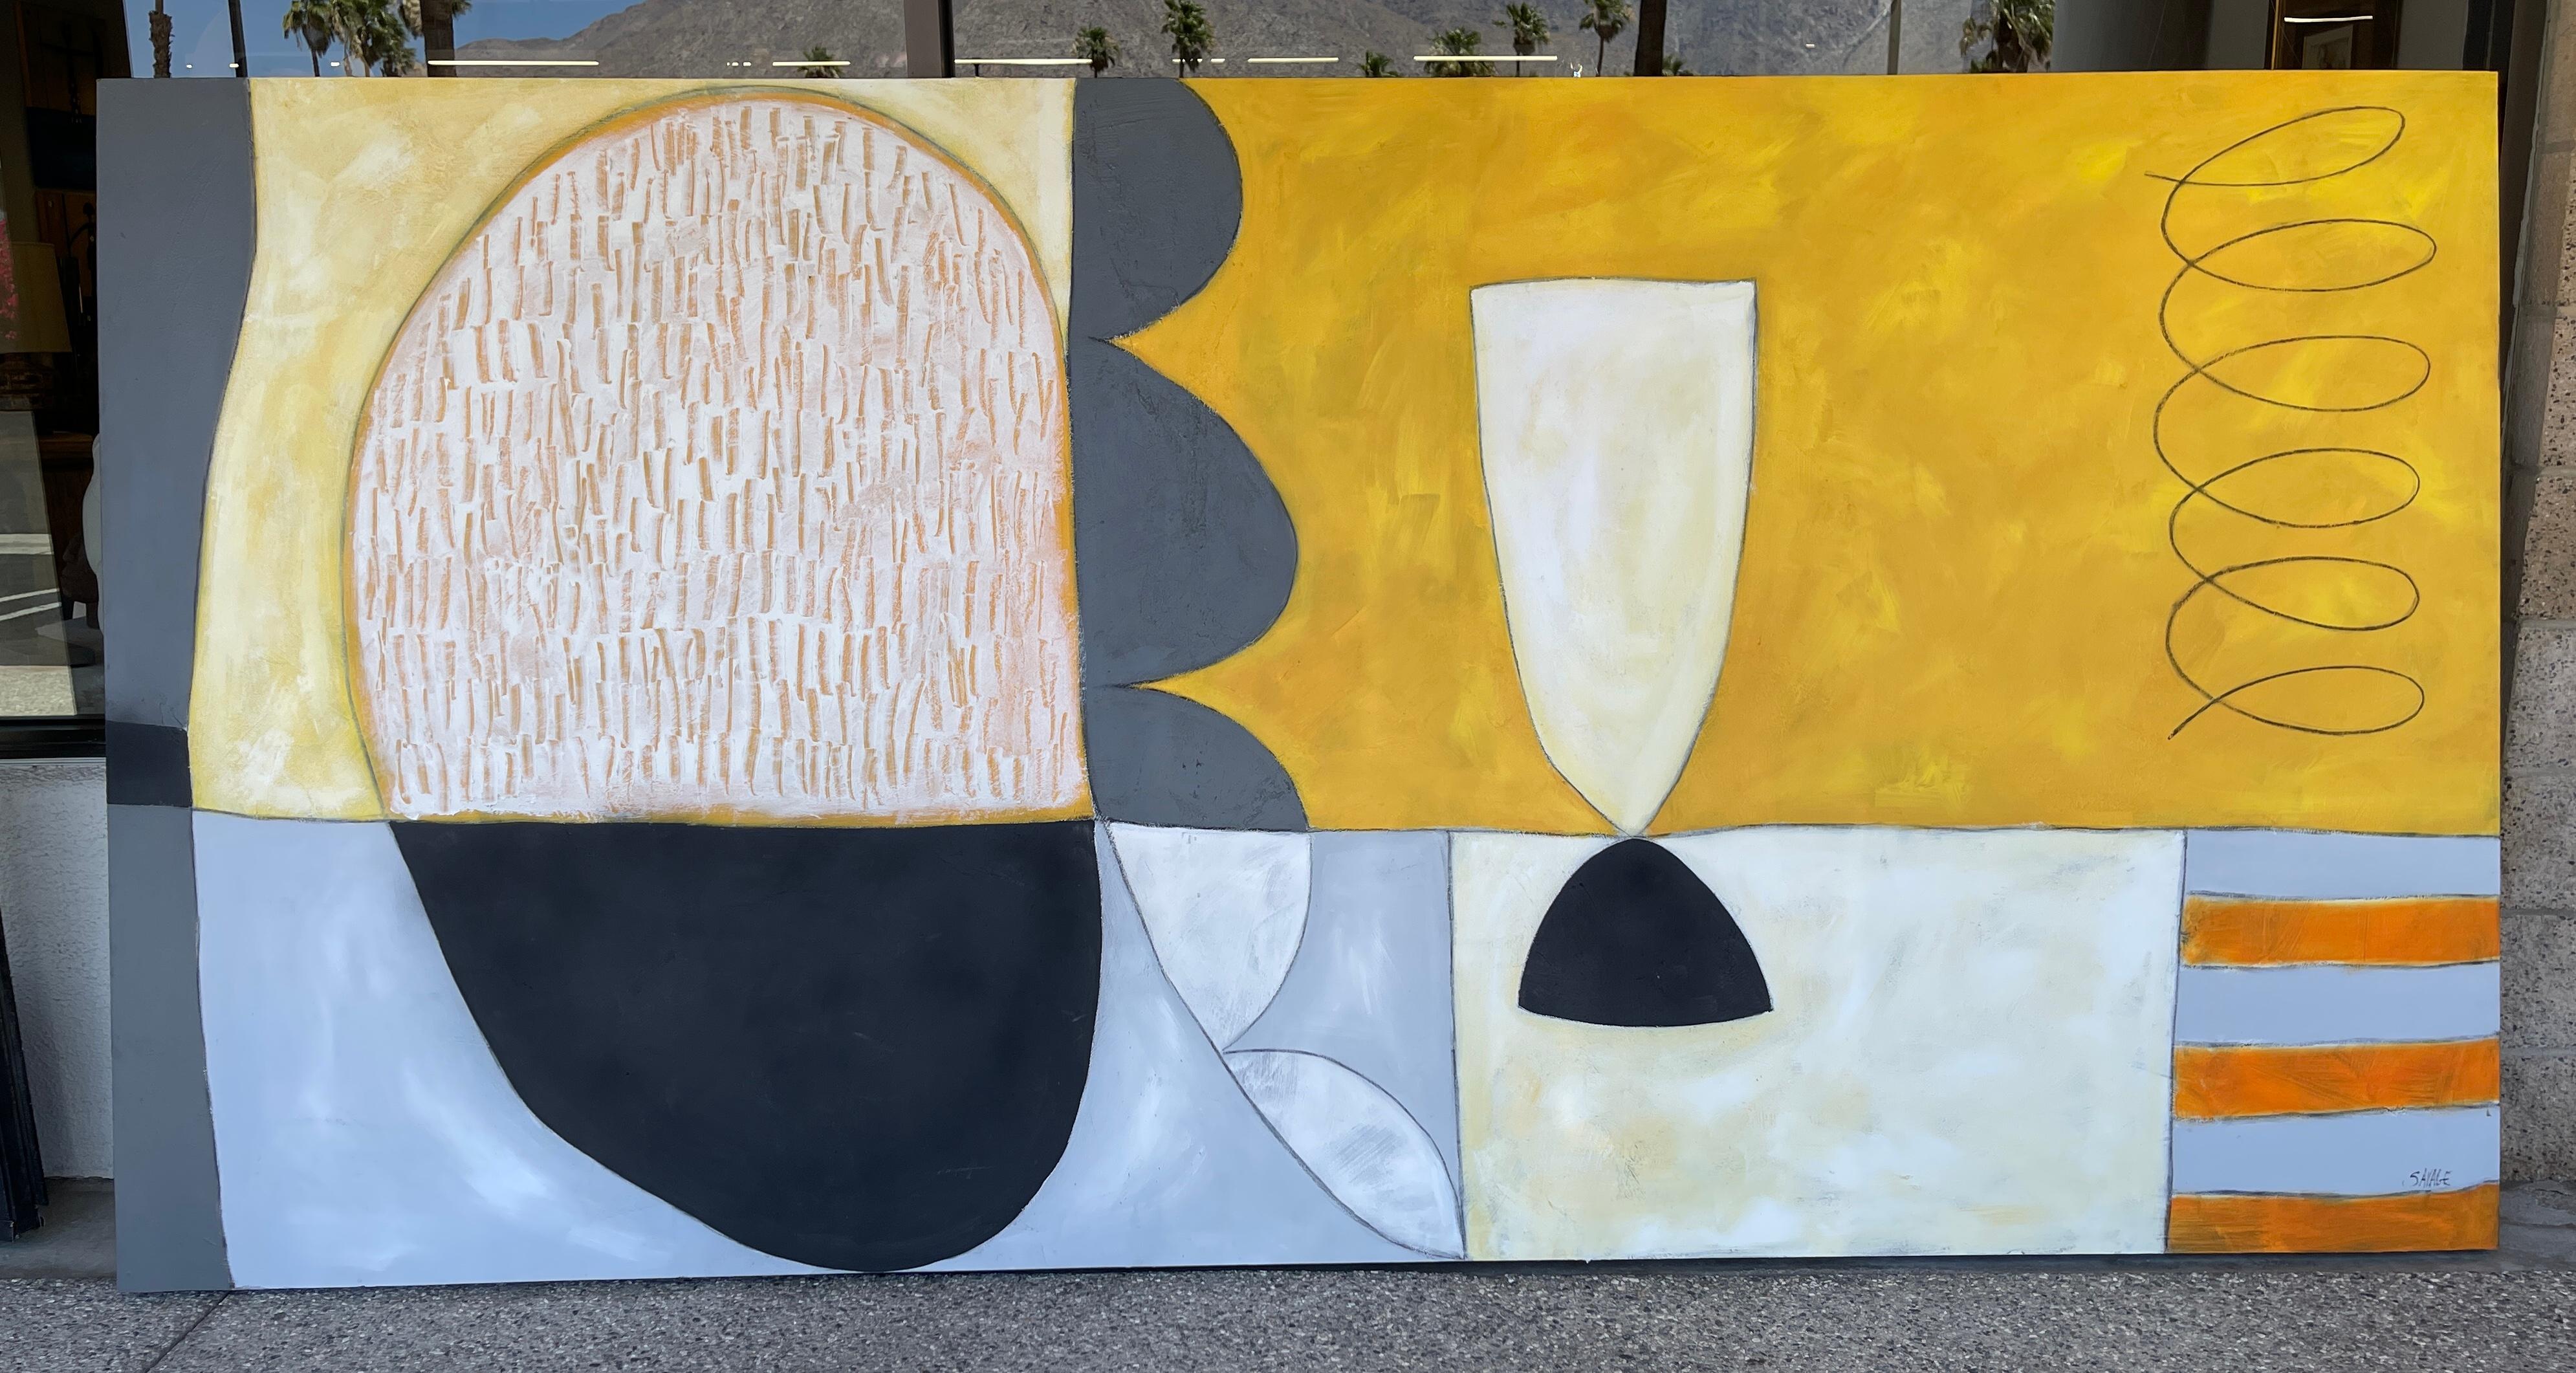 Wonderful whimsical monumental abstract by the noted Palm Springs Artist Shawn Savage. The painting is on masonite with a wood backing. Signed Savage lower right. It is large, at 10 feet wide. The estate we acquired this painting from was purchased